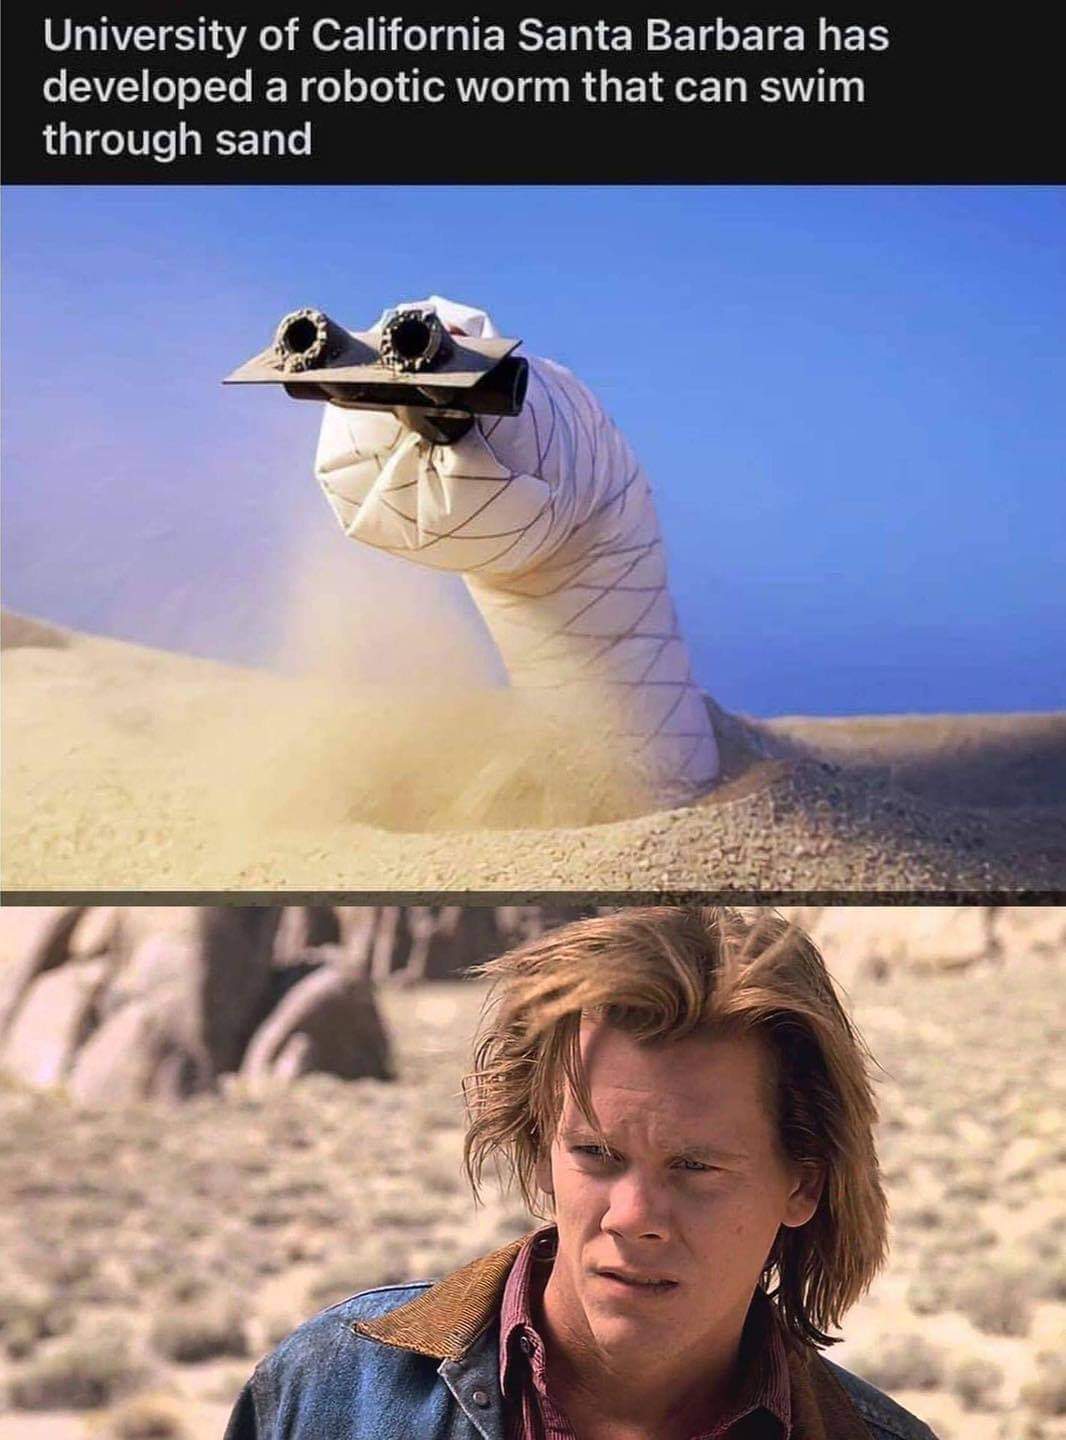 kevin bacon from tremors - University of California Santa Barbara has developed a robotic worm that can swim through sand